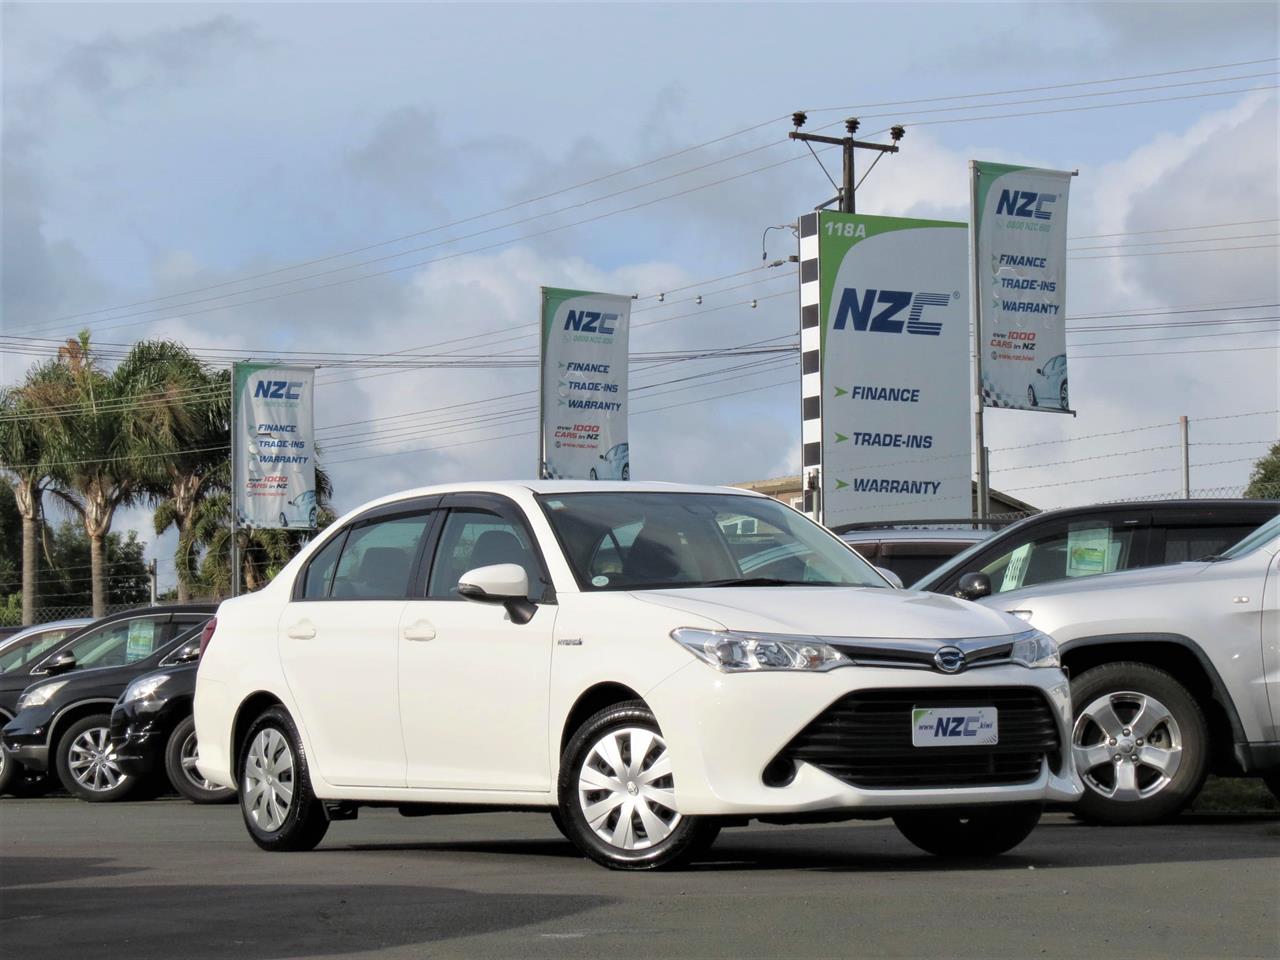 NZC 2016 Toyota Corolla just arrived to Auckland